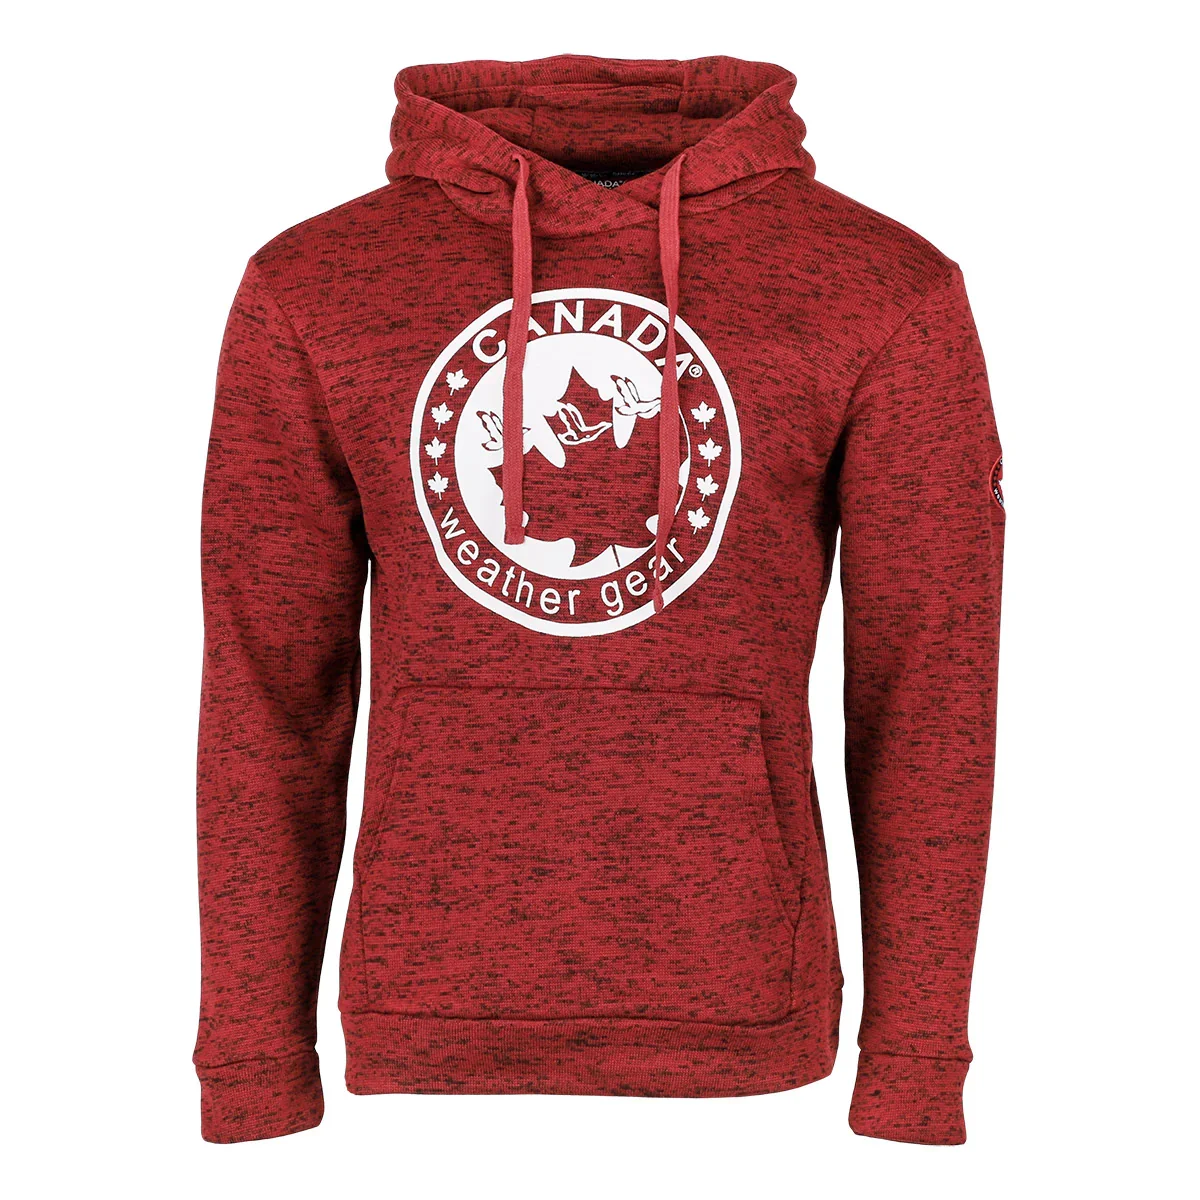 Image of Canada Weather Gear Men's Xover Logo Hoodie